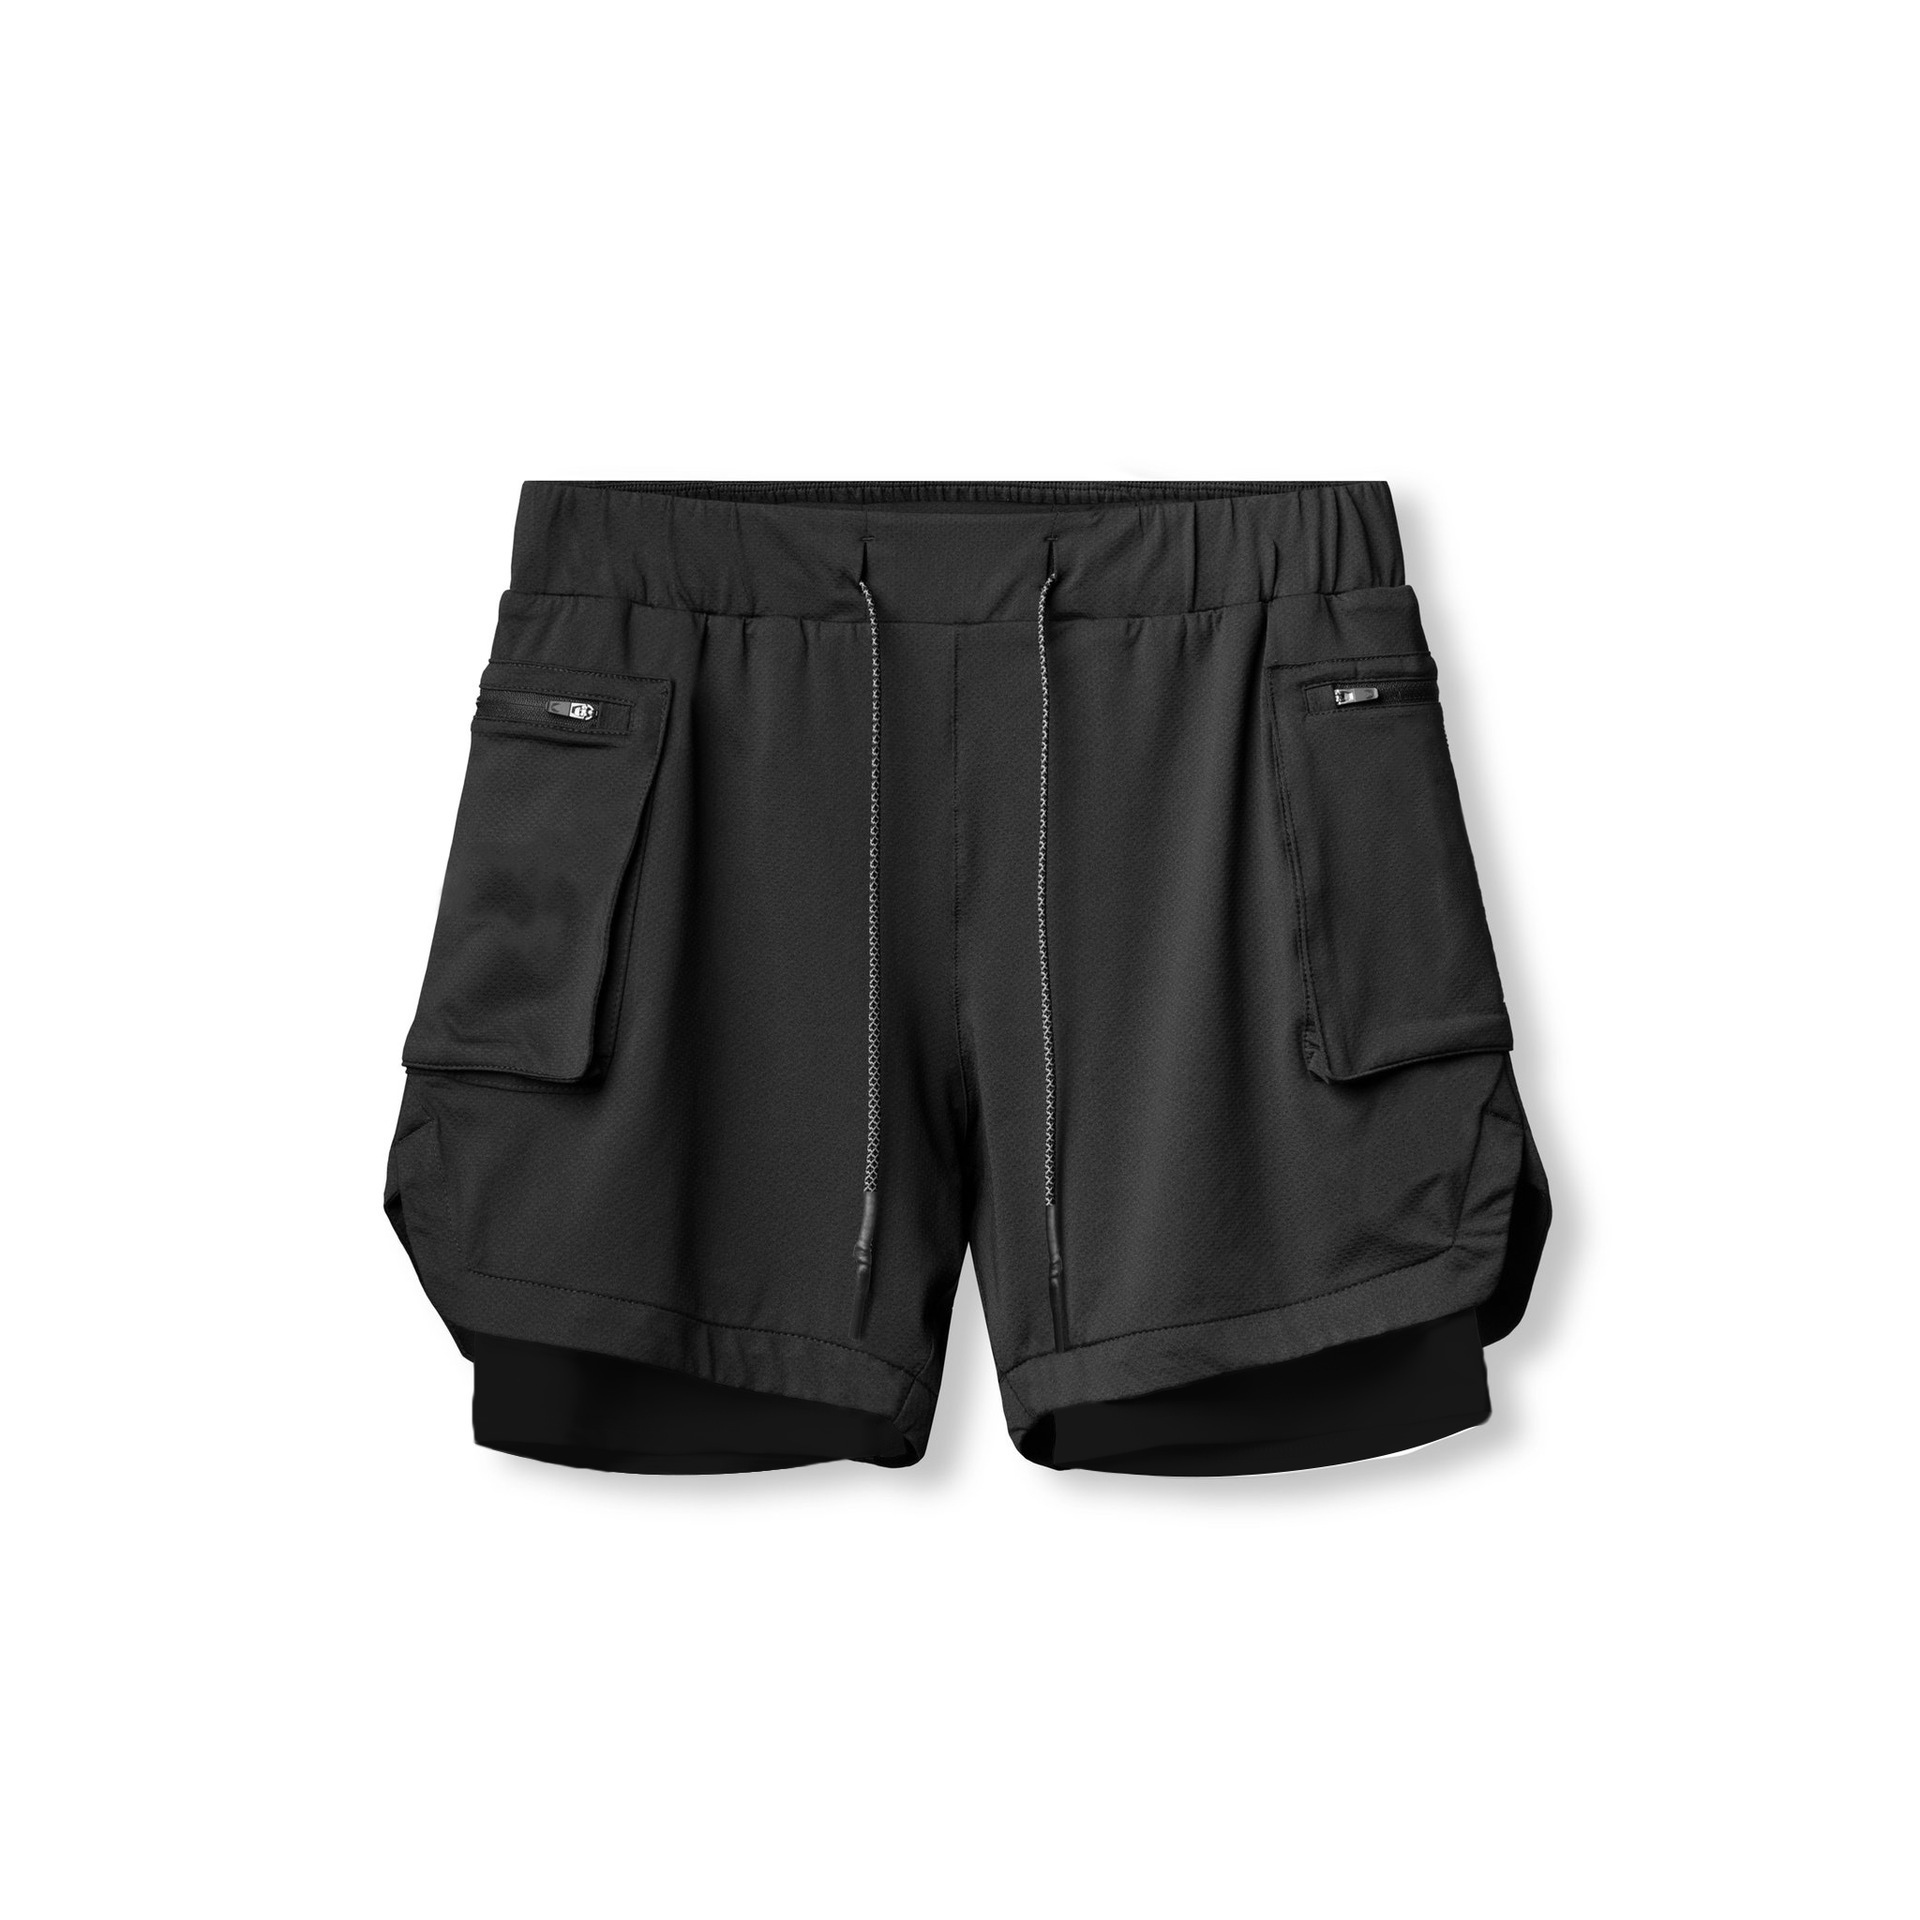 Men's Breathable Double-Layered Shorts for Fitness and Running Training